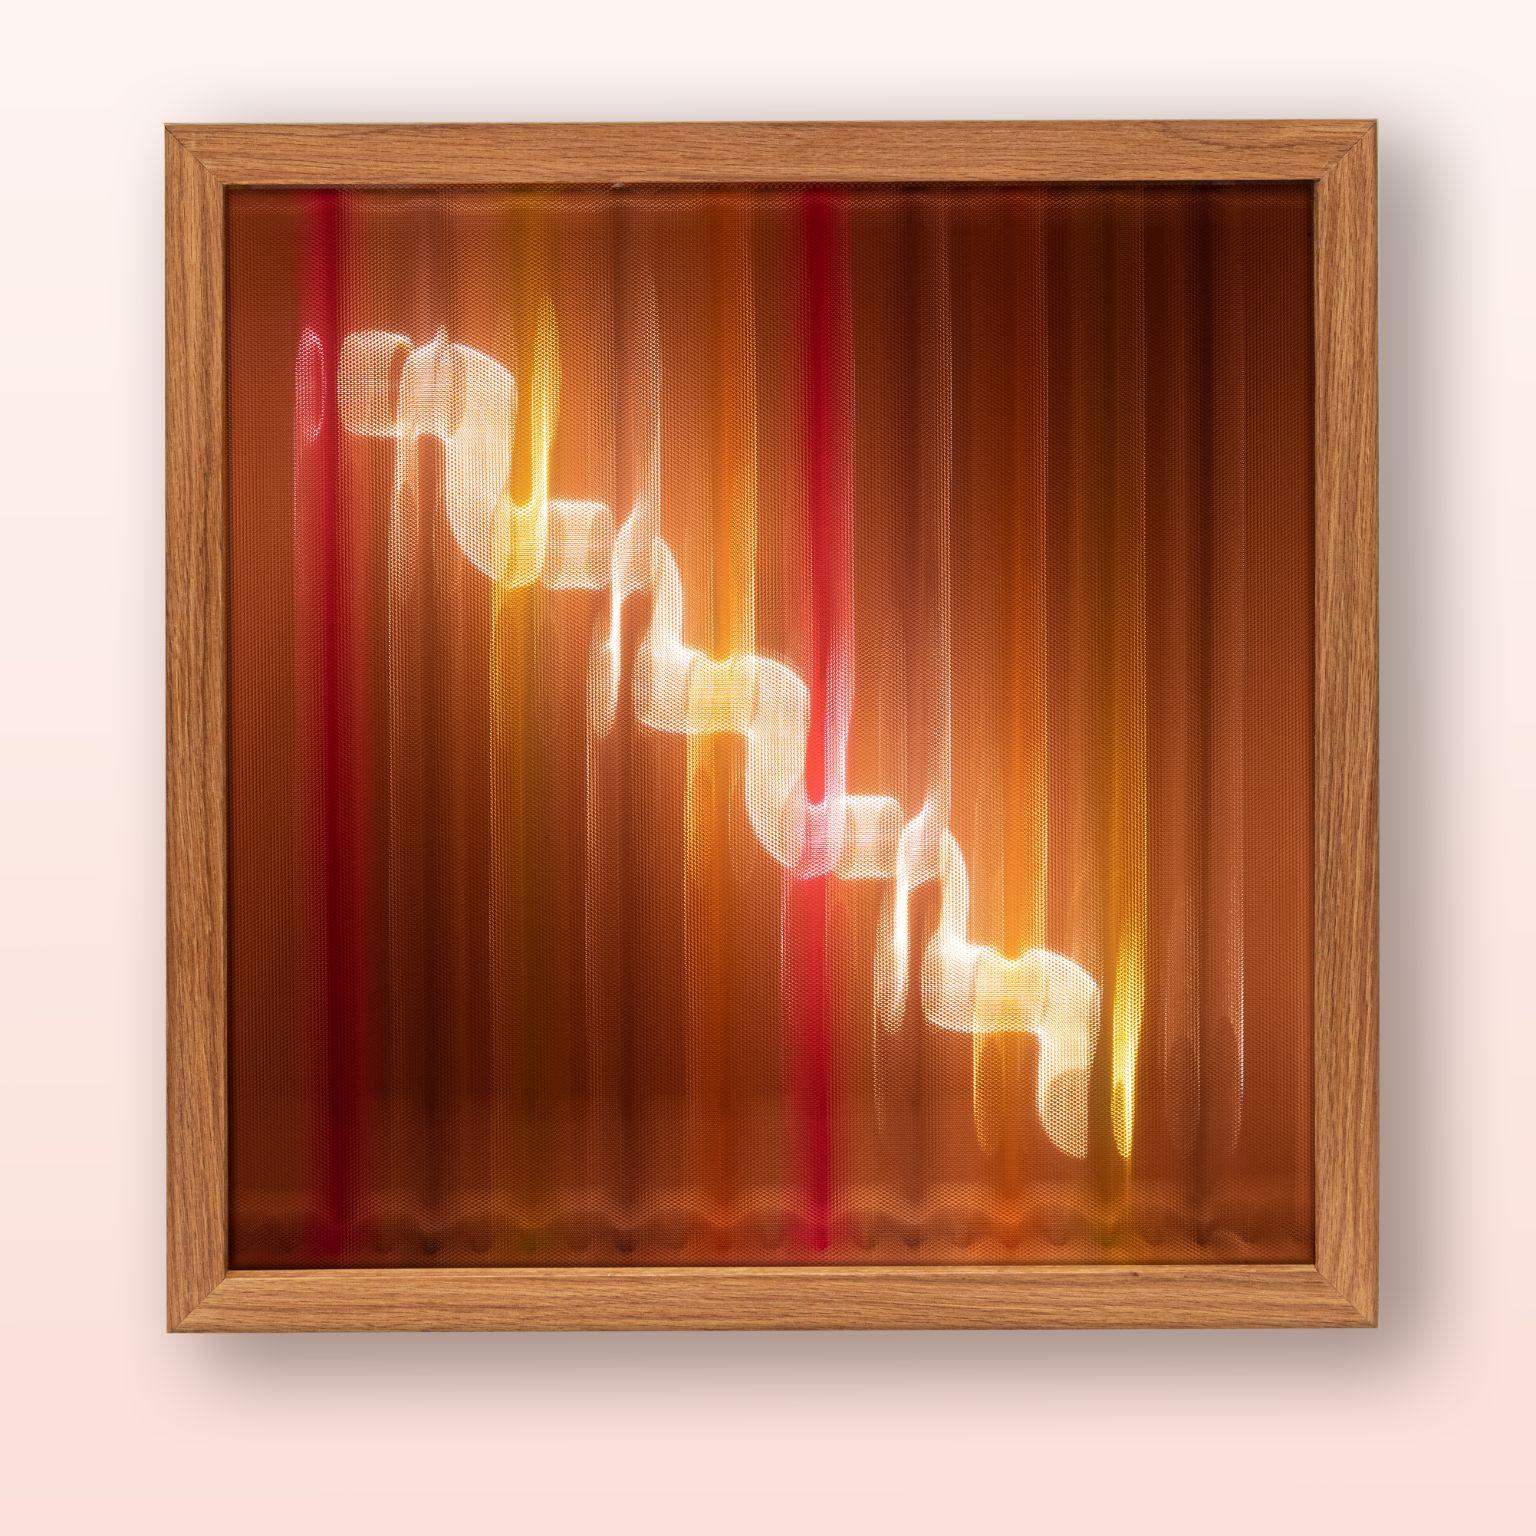 Oscile wall light by Studio Lampent
Edition Of 5
Dimensions: D 53 x W 53 x H 13 cm
Materials: acrylic sheets, acrylic rods, wood. 
Weight: 7.8 kg.
Customizable frame wood type (oak, ash, birch, etc) and color.

All our lamps can be wired